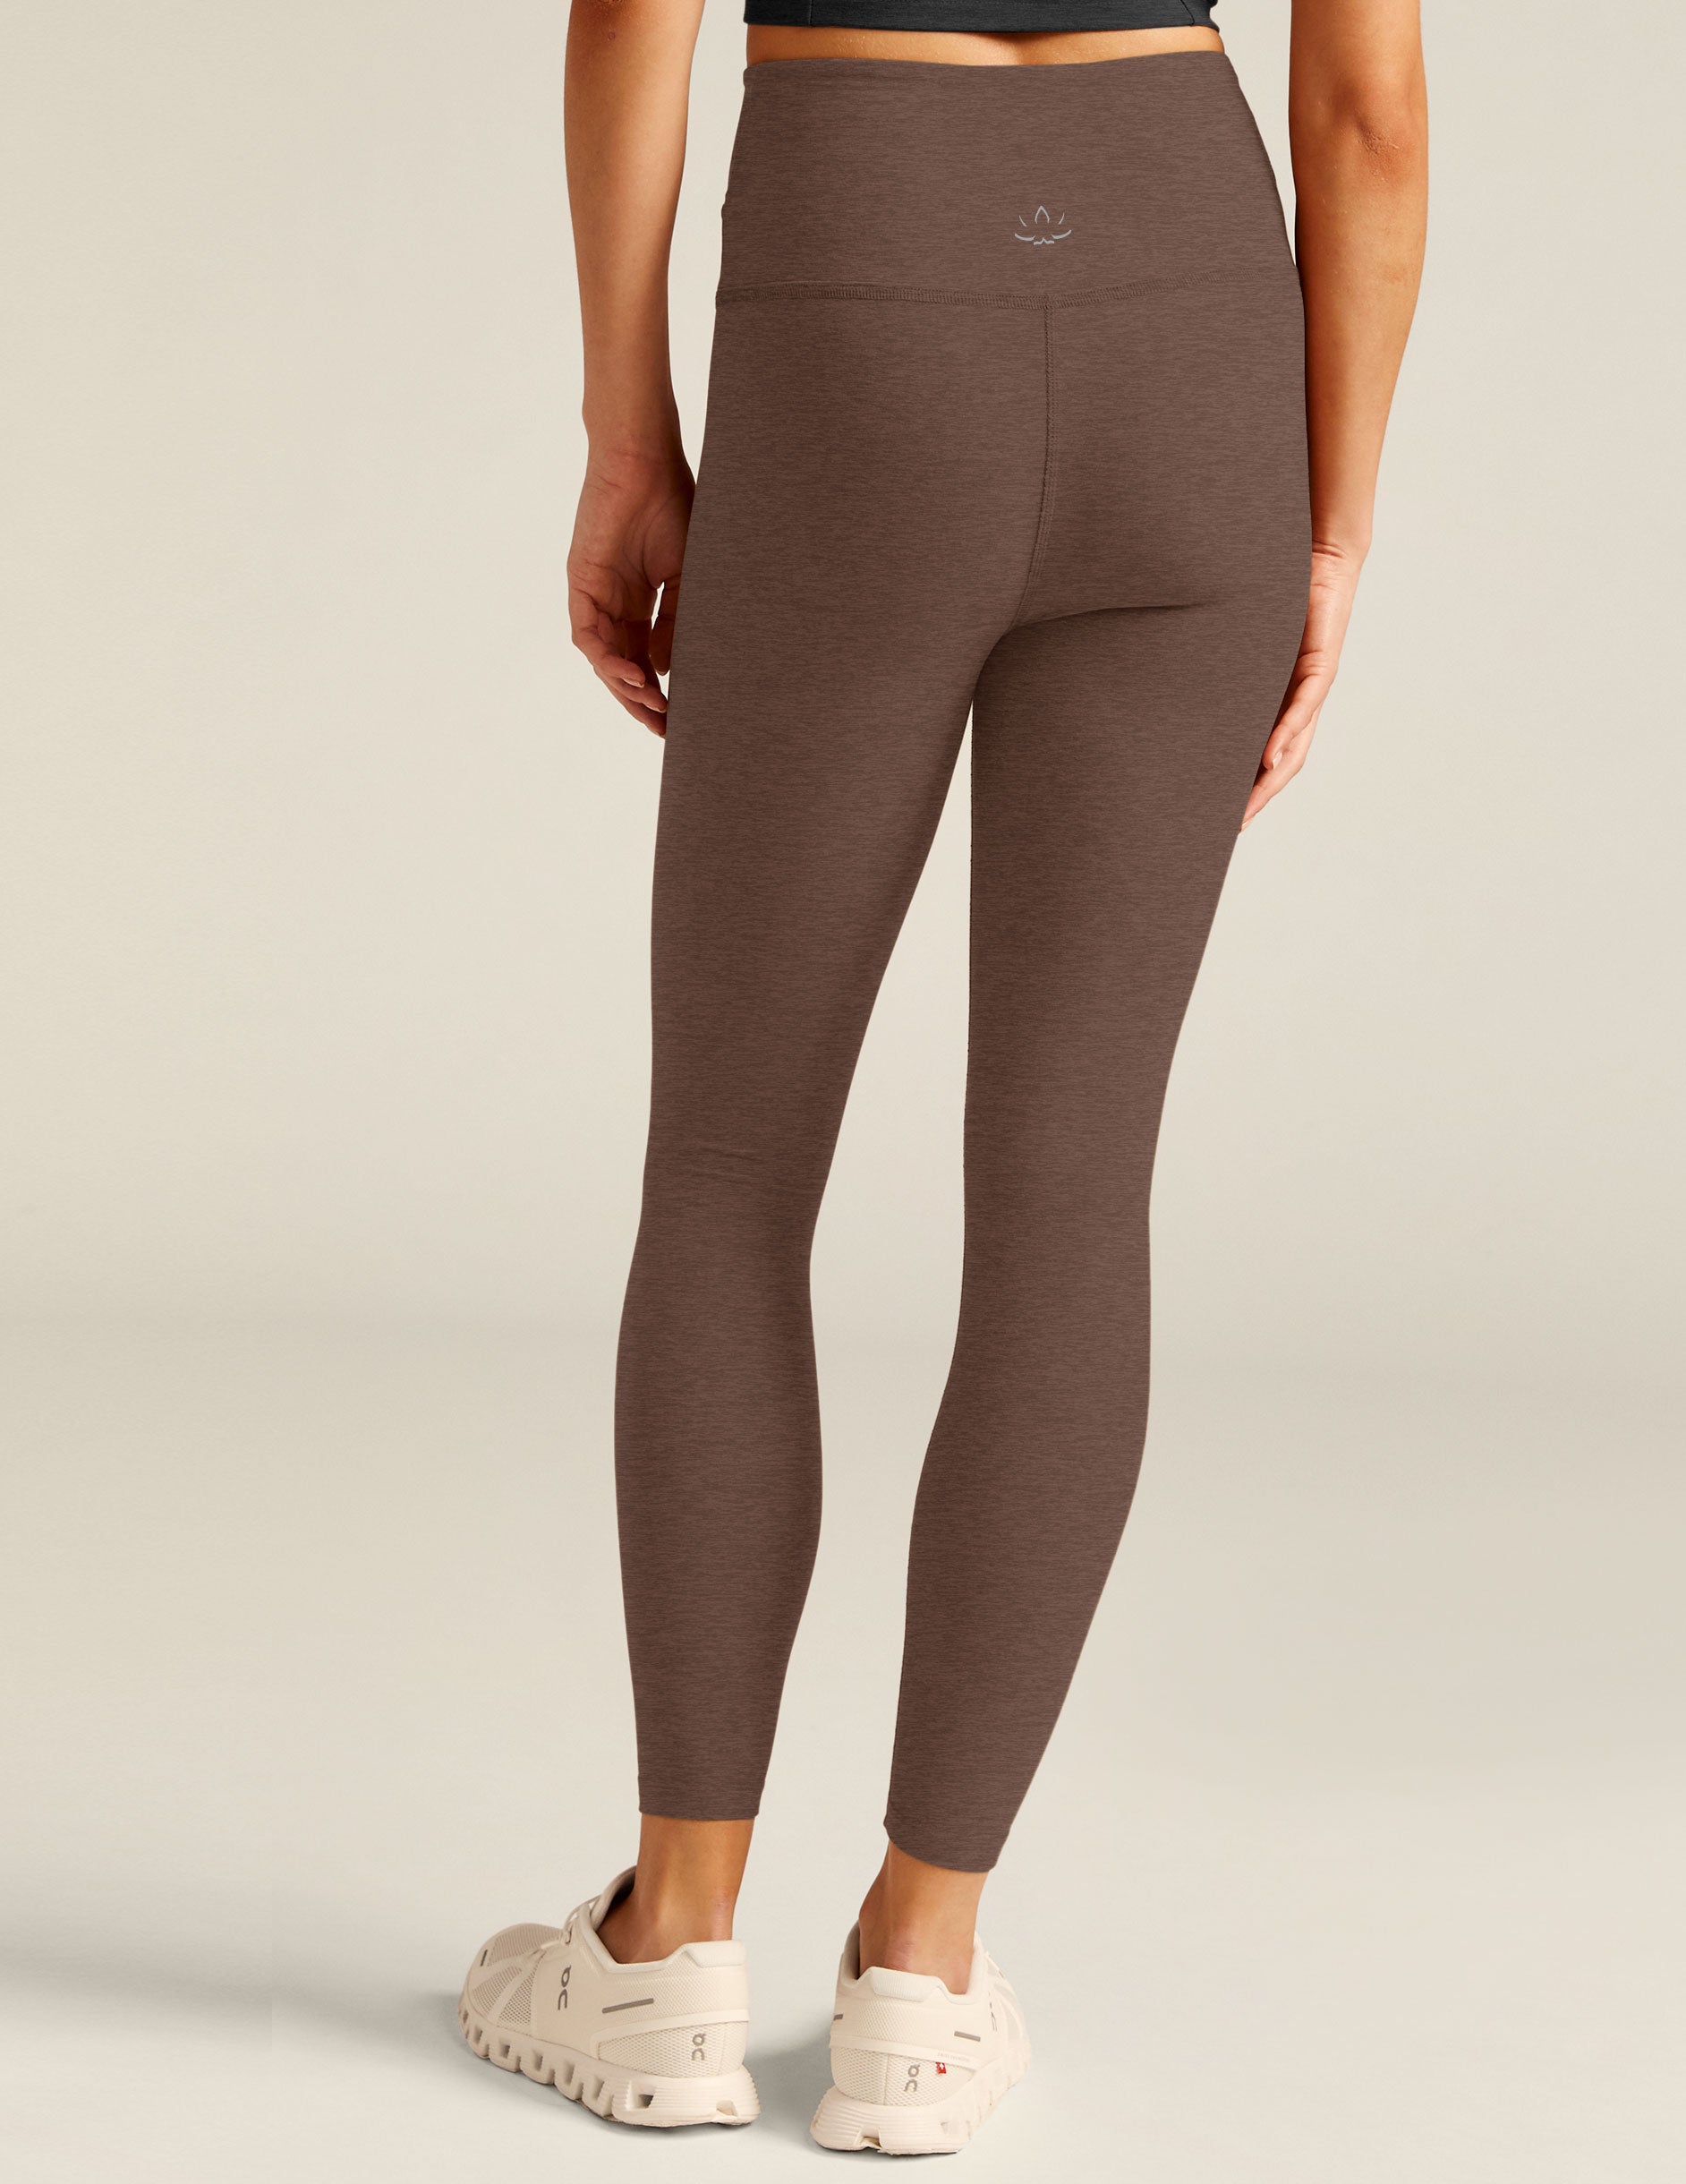 brown high-waisted midi leggings with a front crossover design on the waistband. 